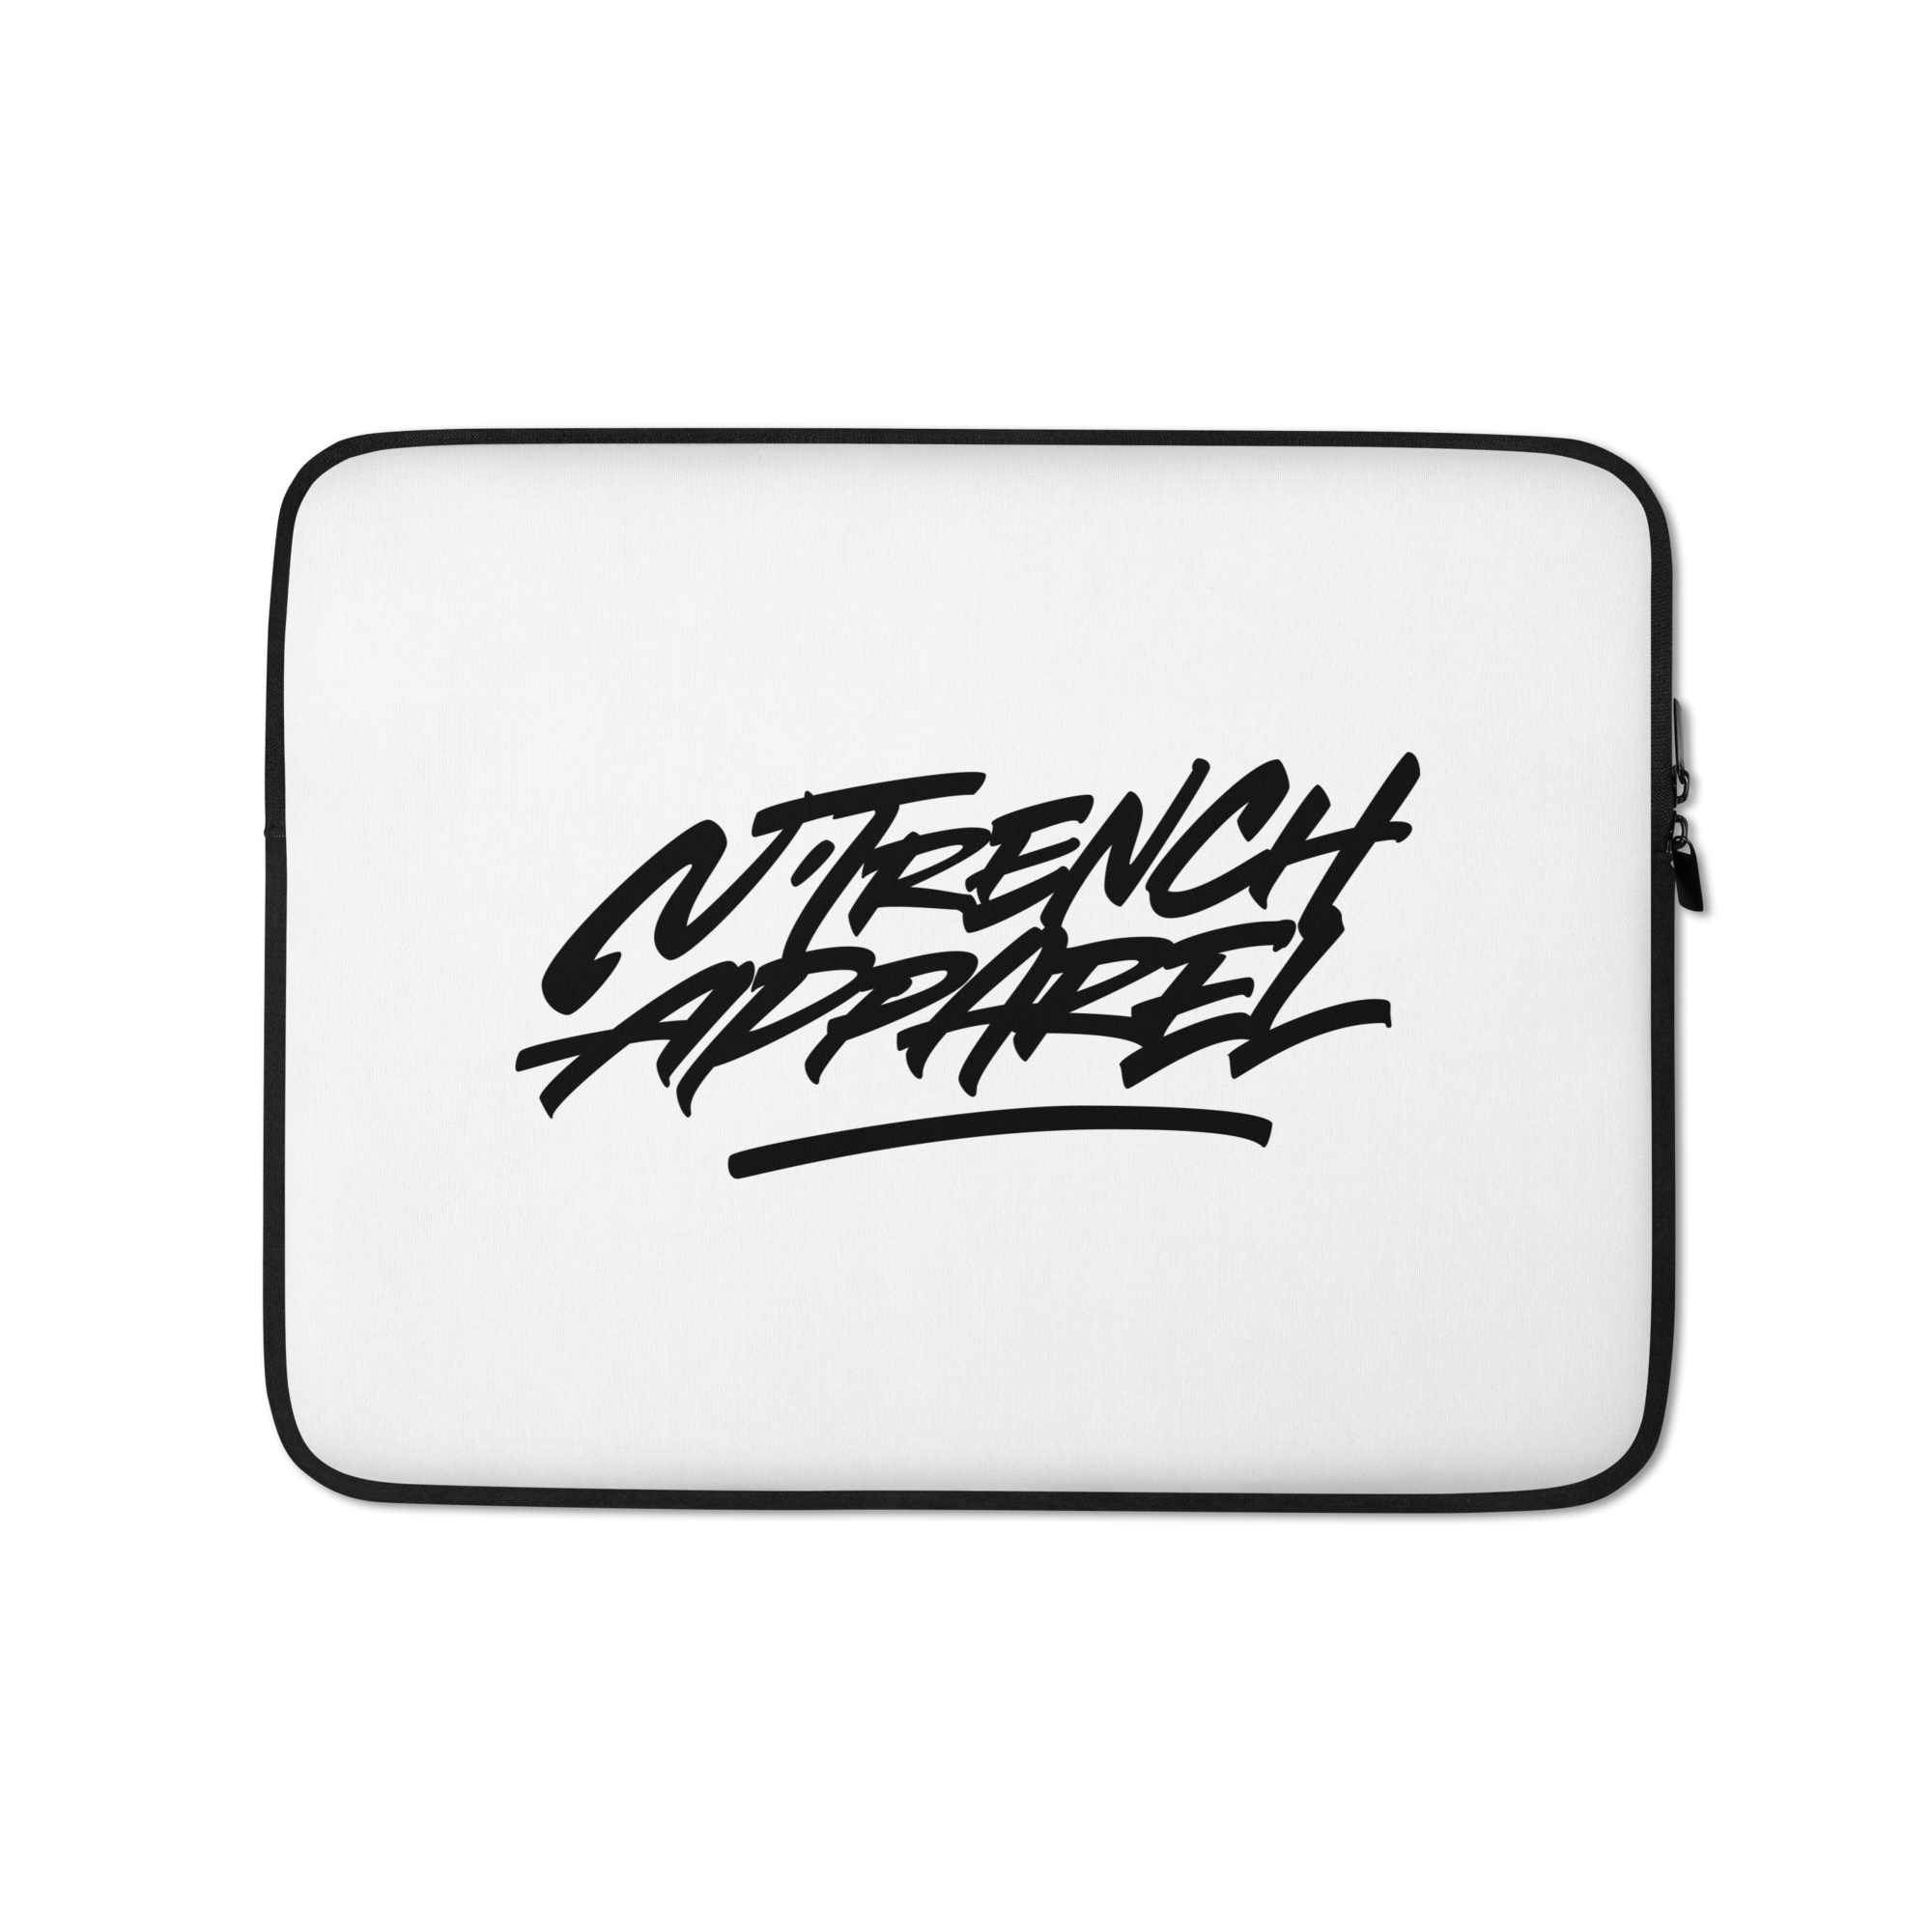 N'Trench Apparel Laptop Sleeve